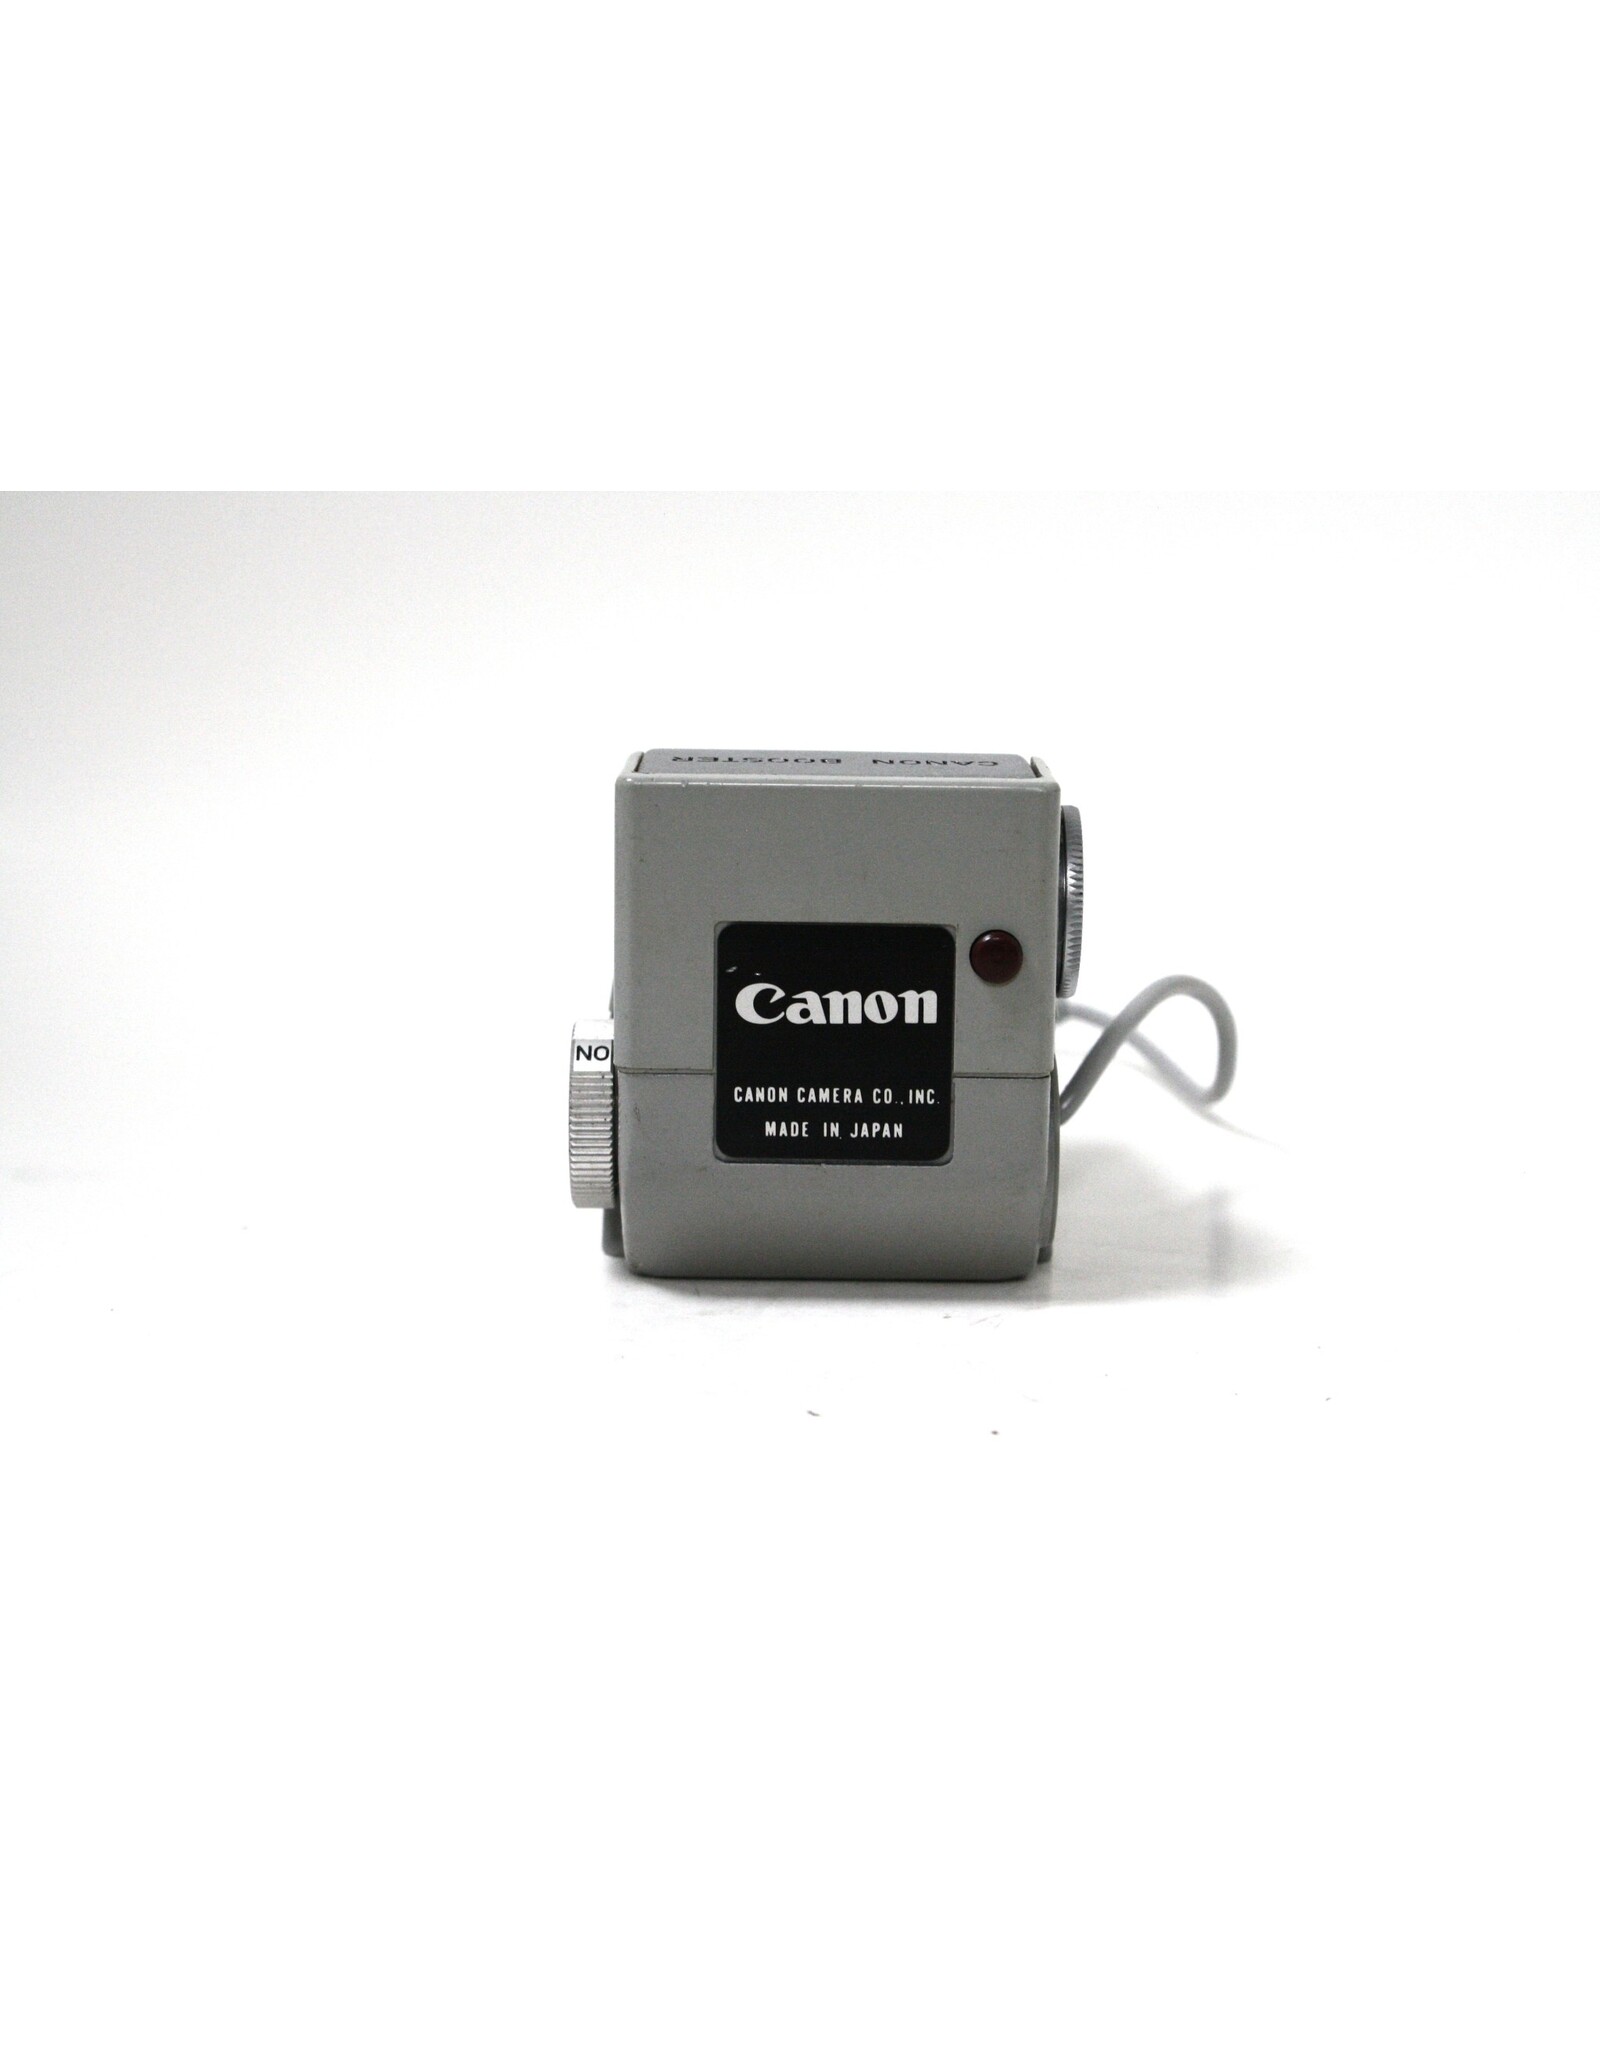 Canon Booster Meter For Canon QL FT FTb Bodies With Case Untested As Is